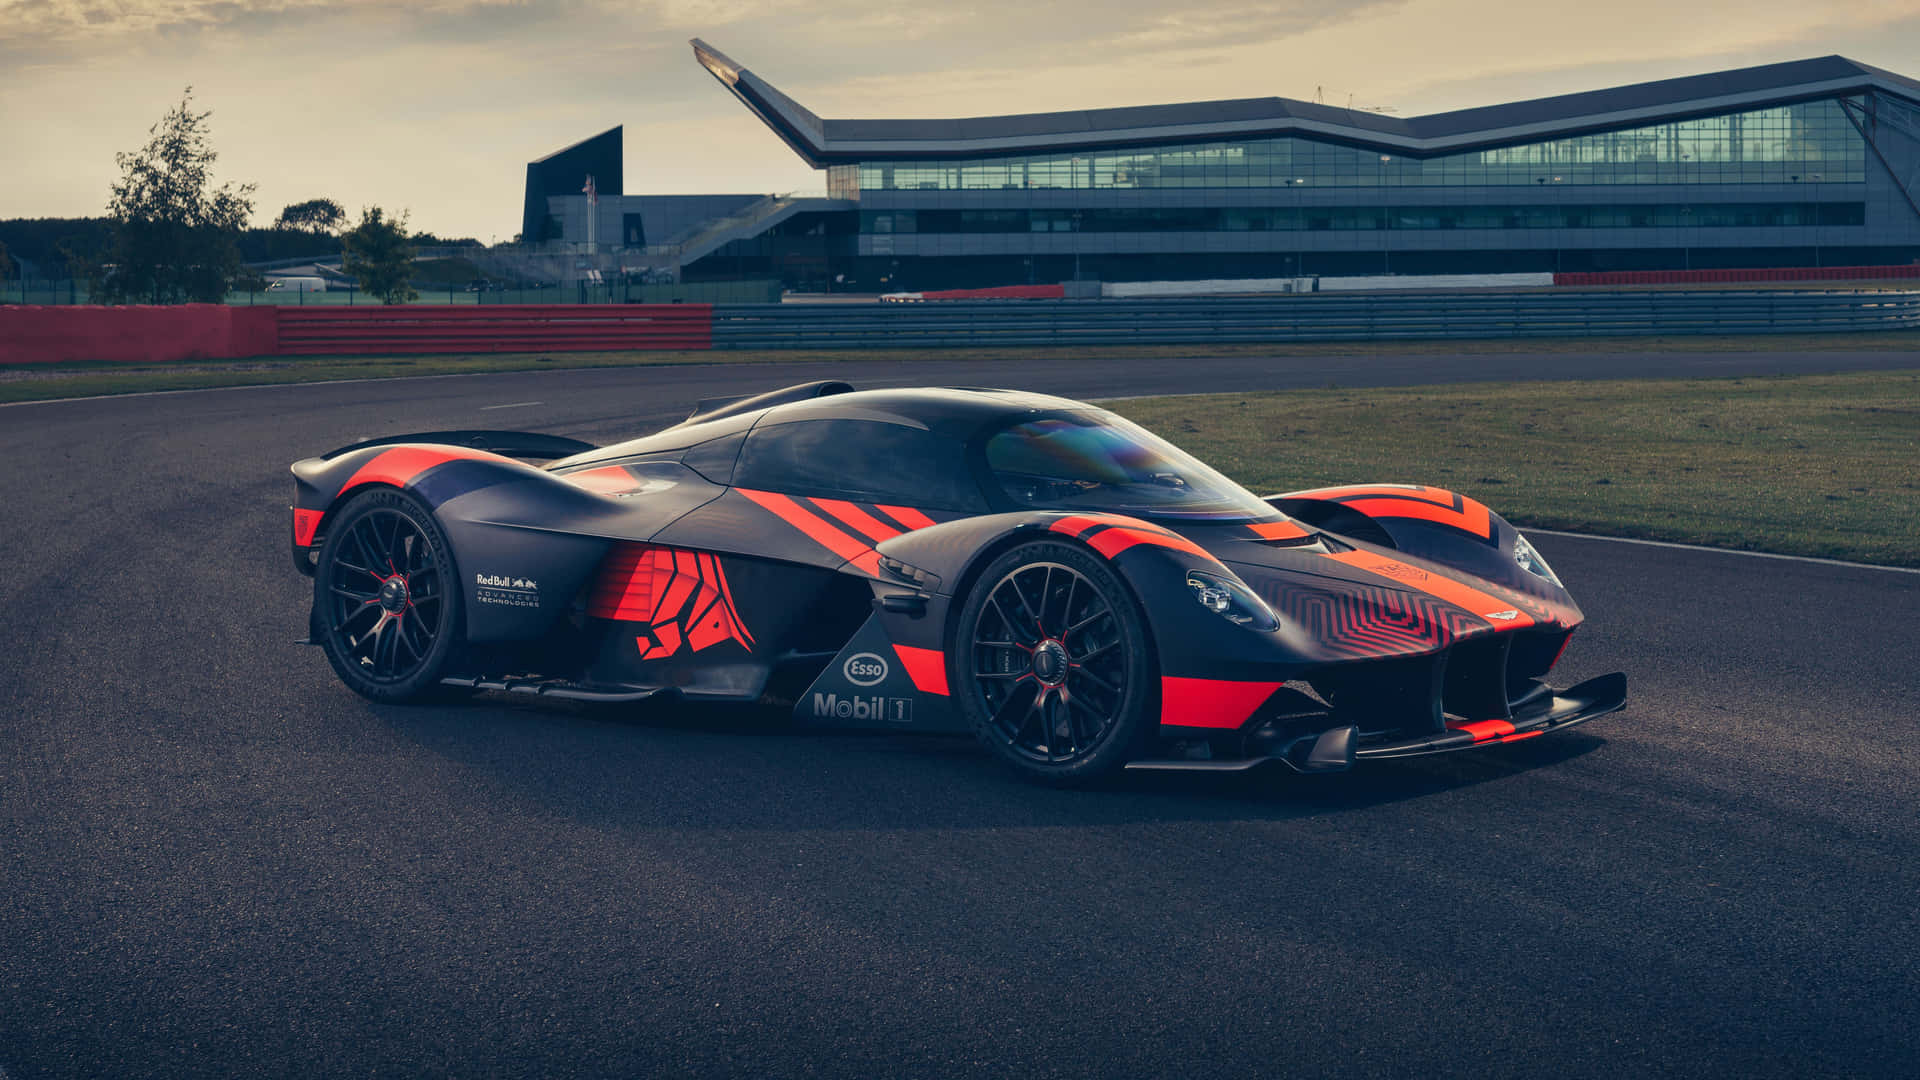 Aston Martin Valkyrie - A Masterpiece of Engineering and Design Wallpaper